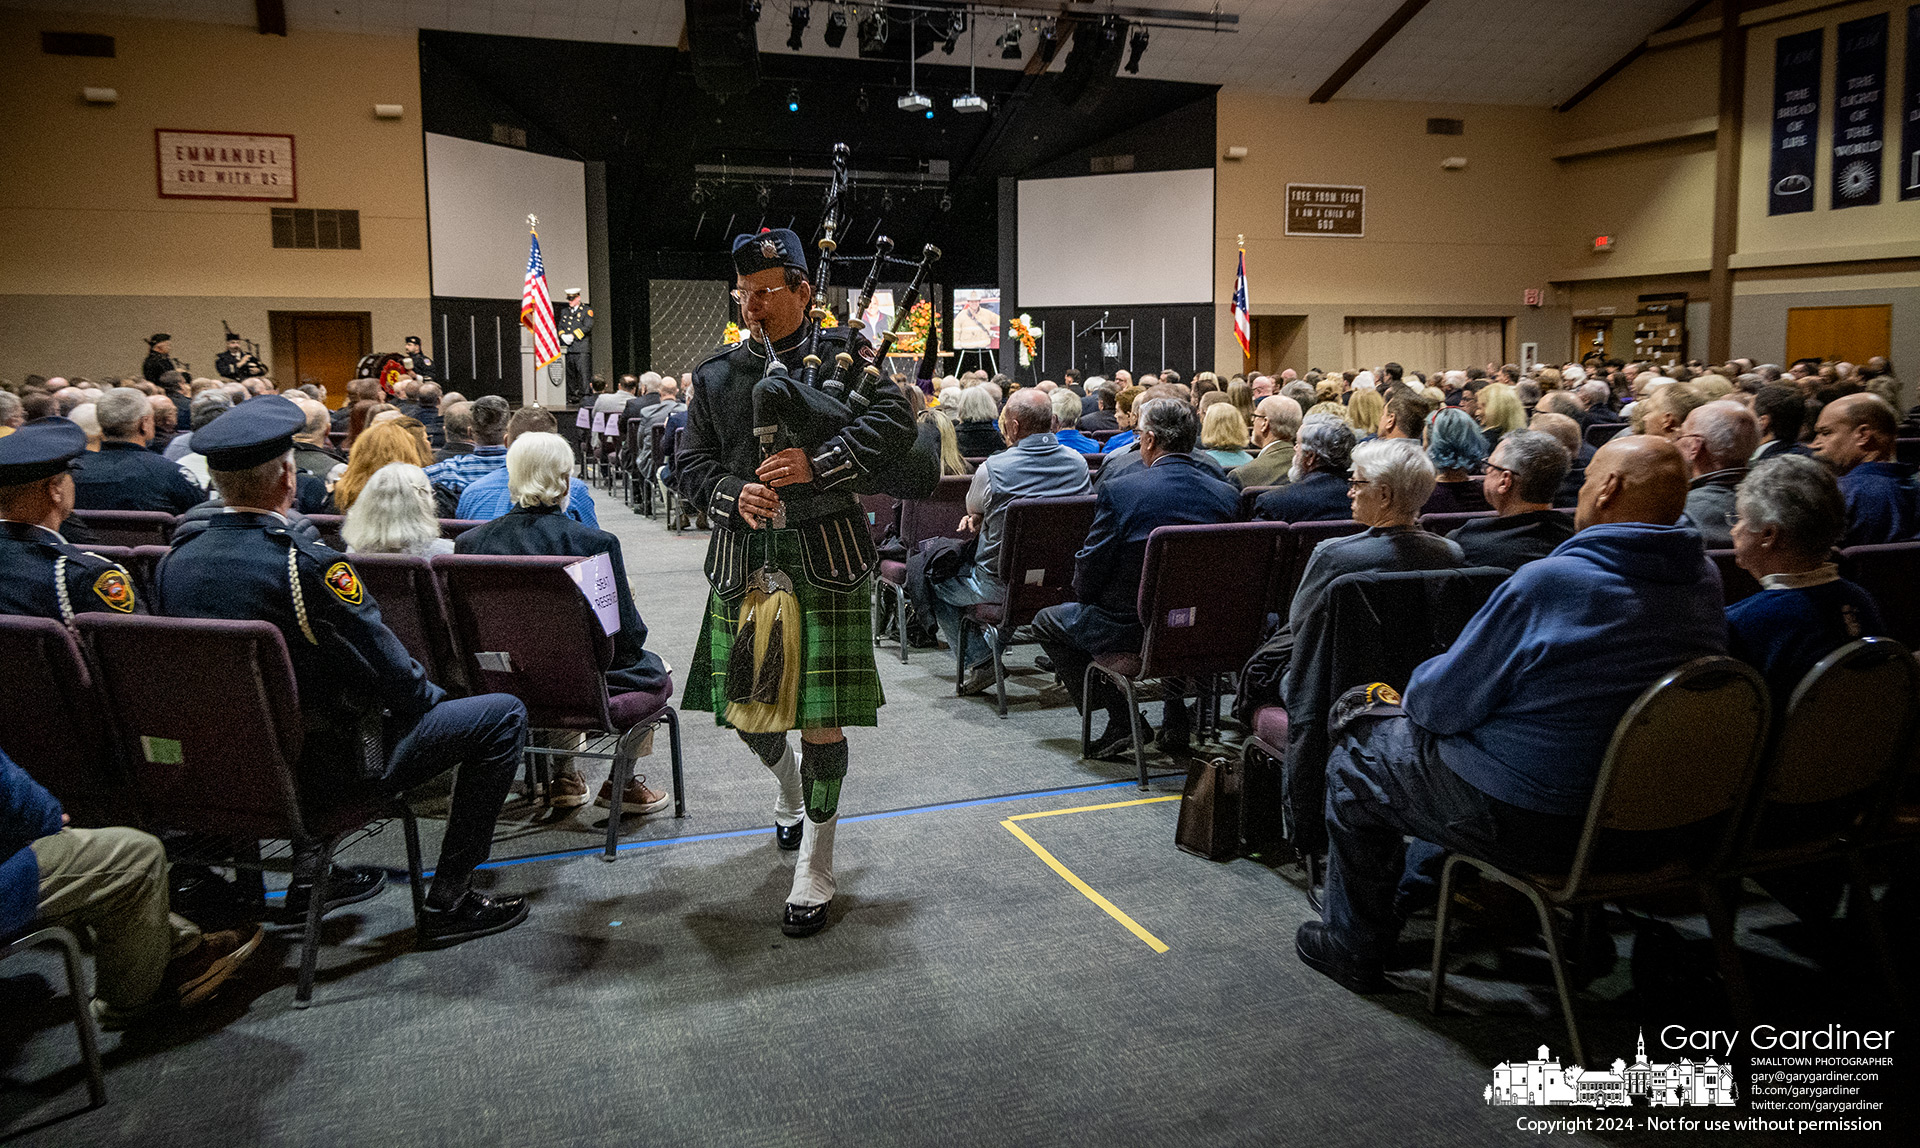 A bagpiper exits the sanctuary at Heritage Christian Church after the Celebration of Life Ceremony for retired Westerville Battalion Chief Andy Hicks who died last week, My Final Photo for February 5, 2024.